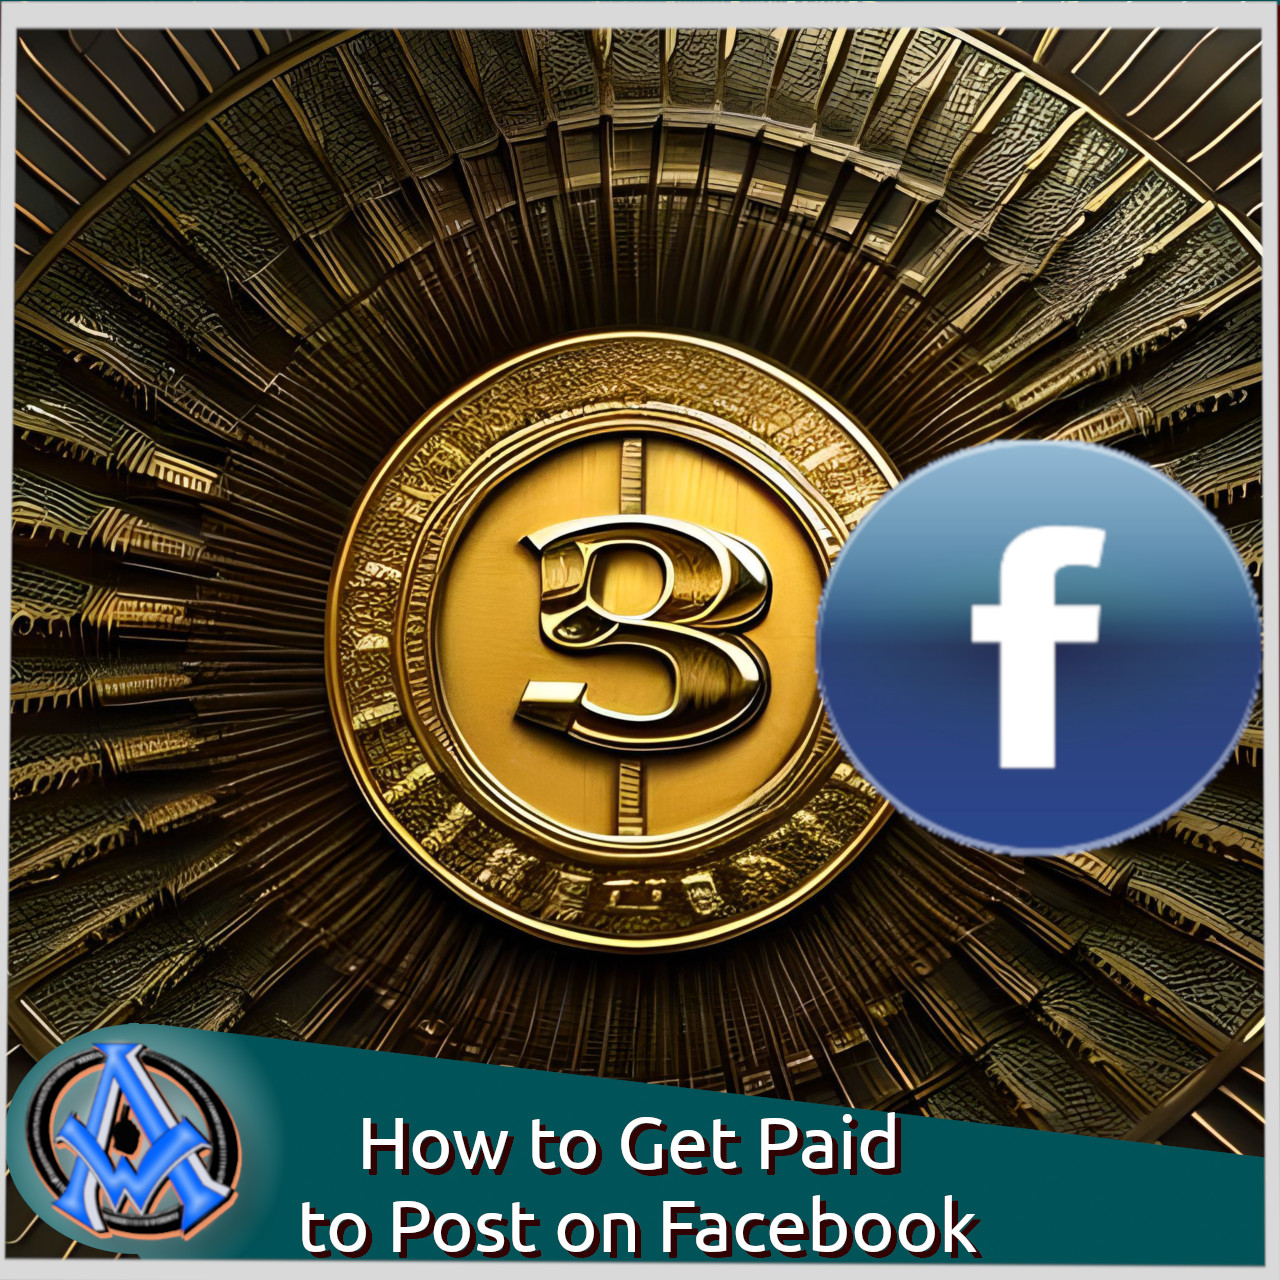 How to Get Paid to Post on Facebook